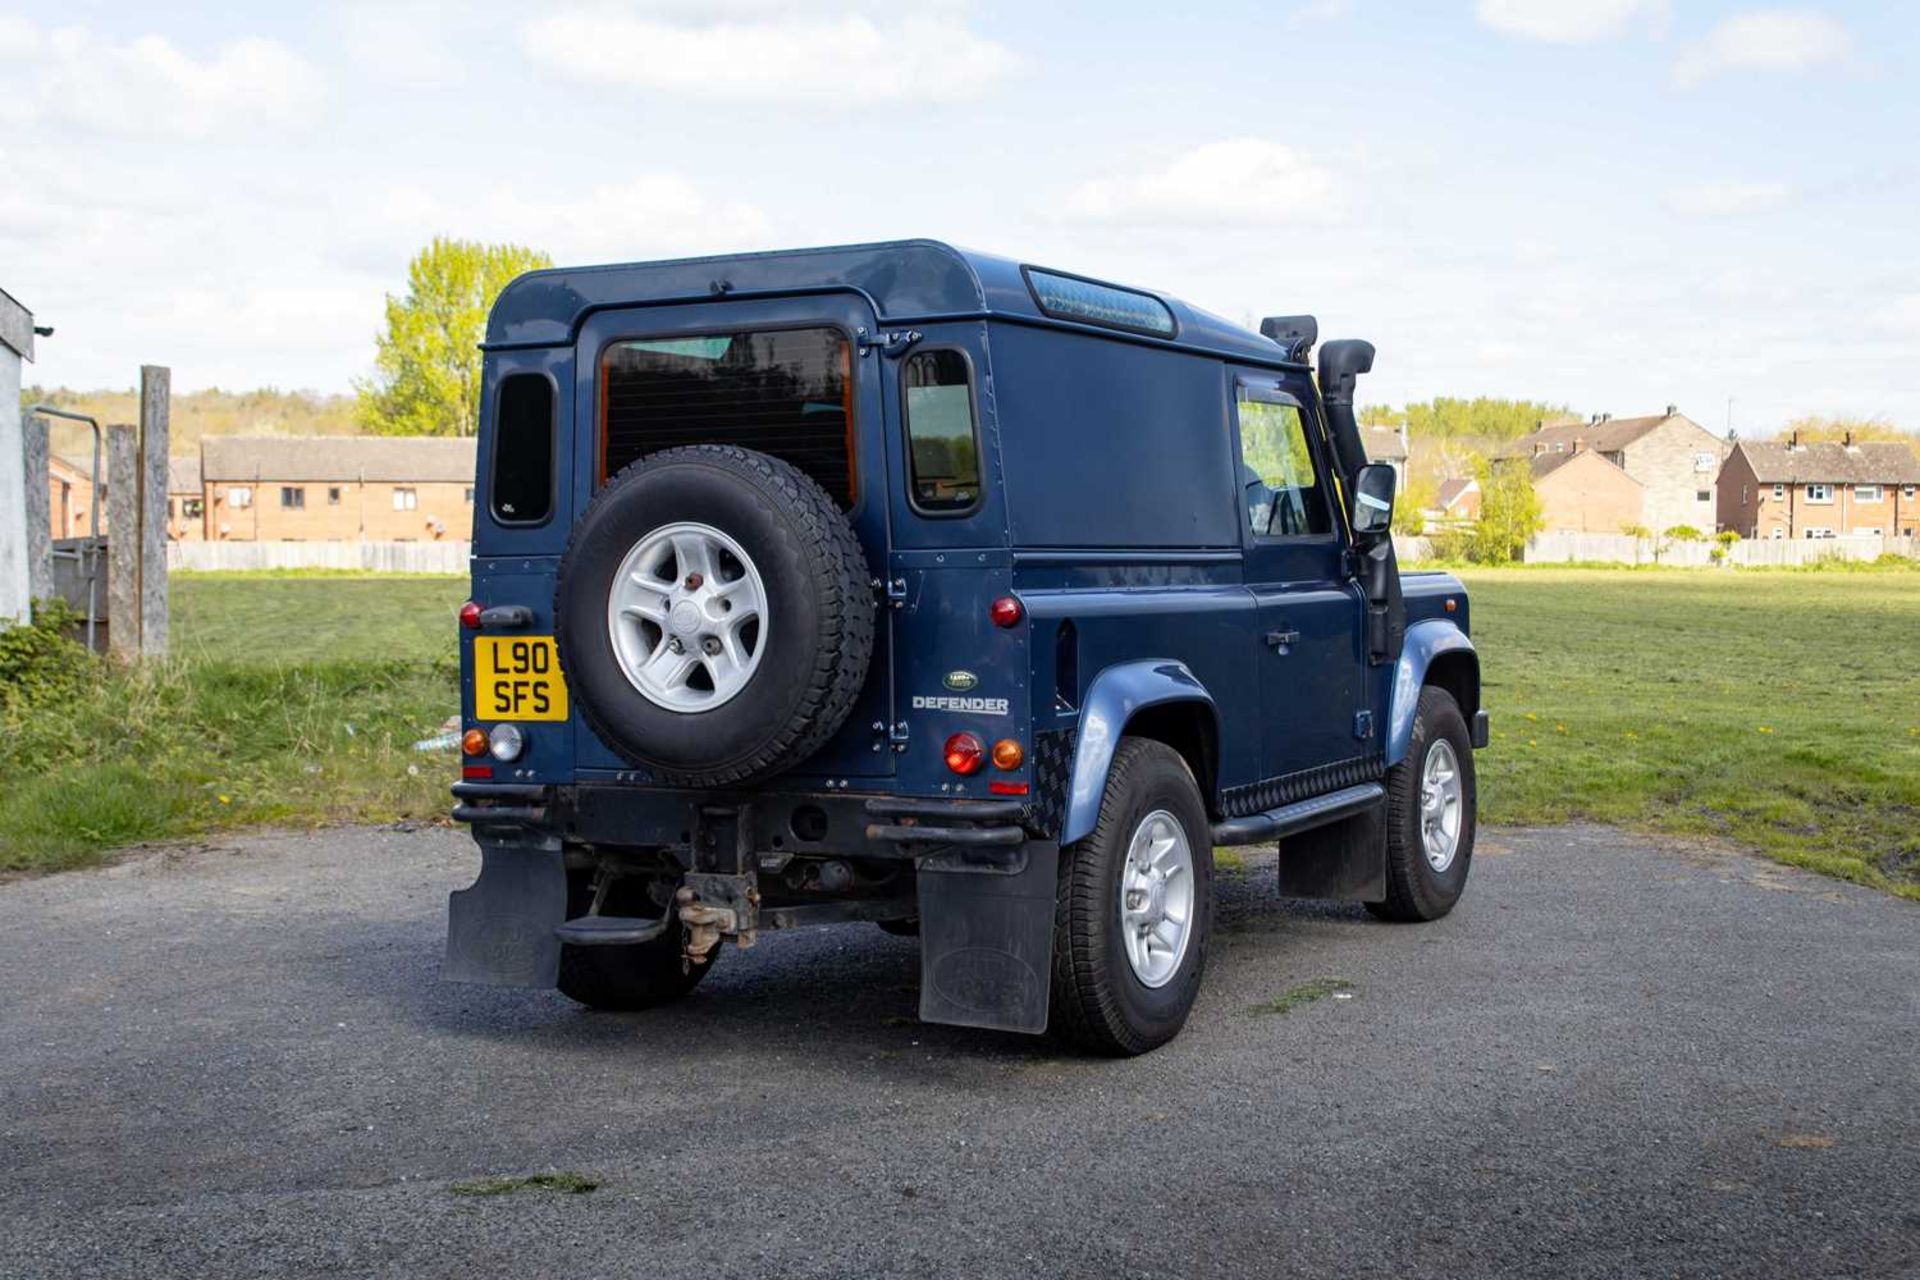 2007 Land Rover Defender 90 County  Powered by the 2.4-litre TDCi unit and features numerous tastefu - Image 12 of 76